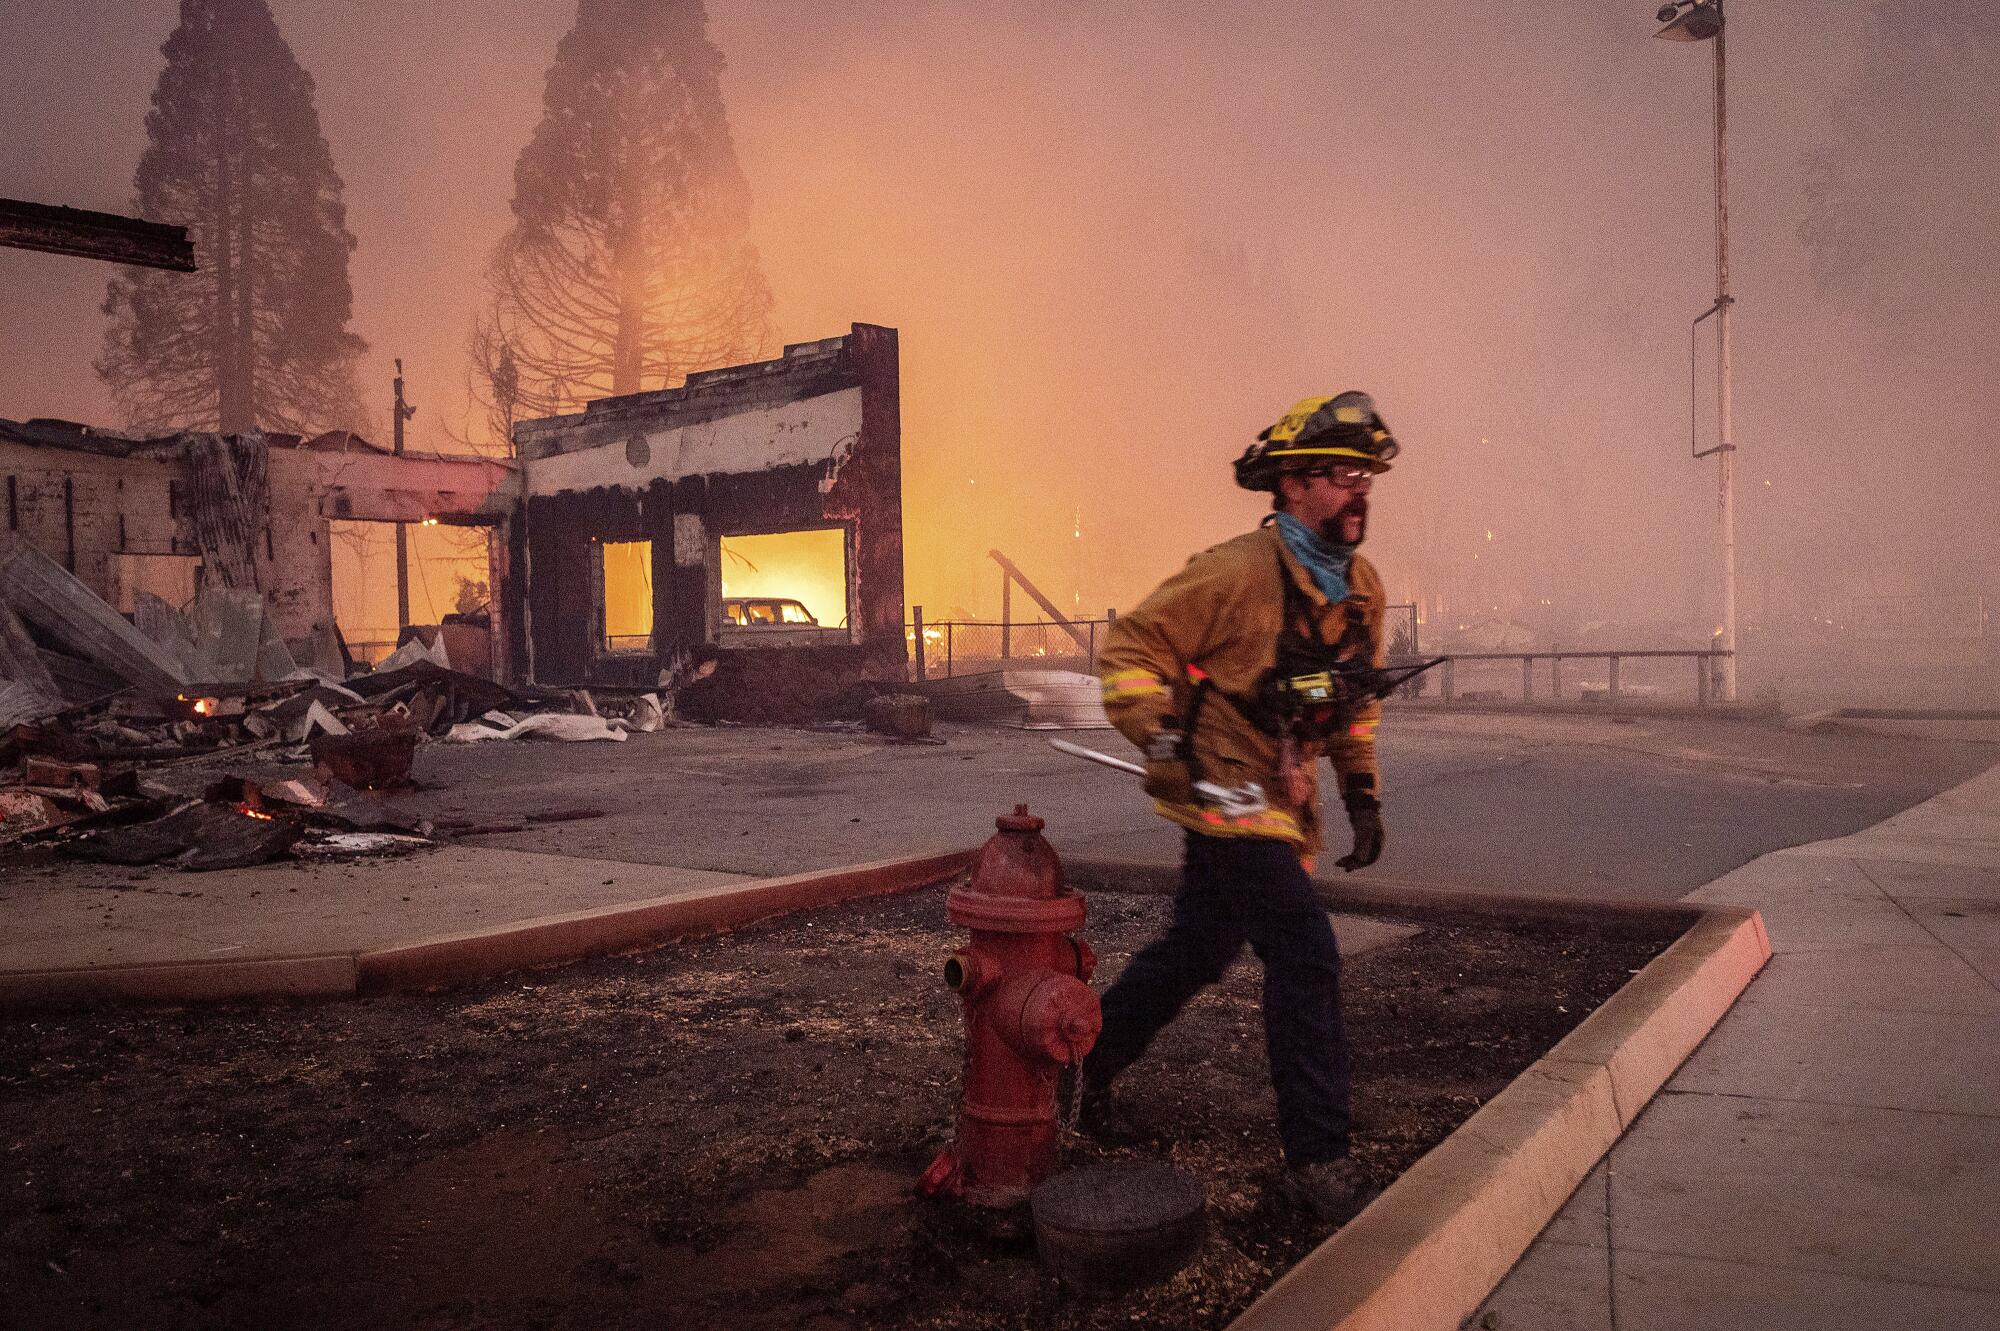 A firefighter walks past buildings destroyed by the Dixie fire in Greenville, Calif.